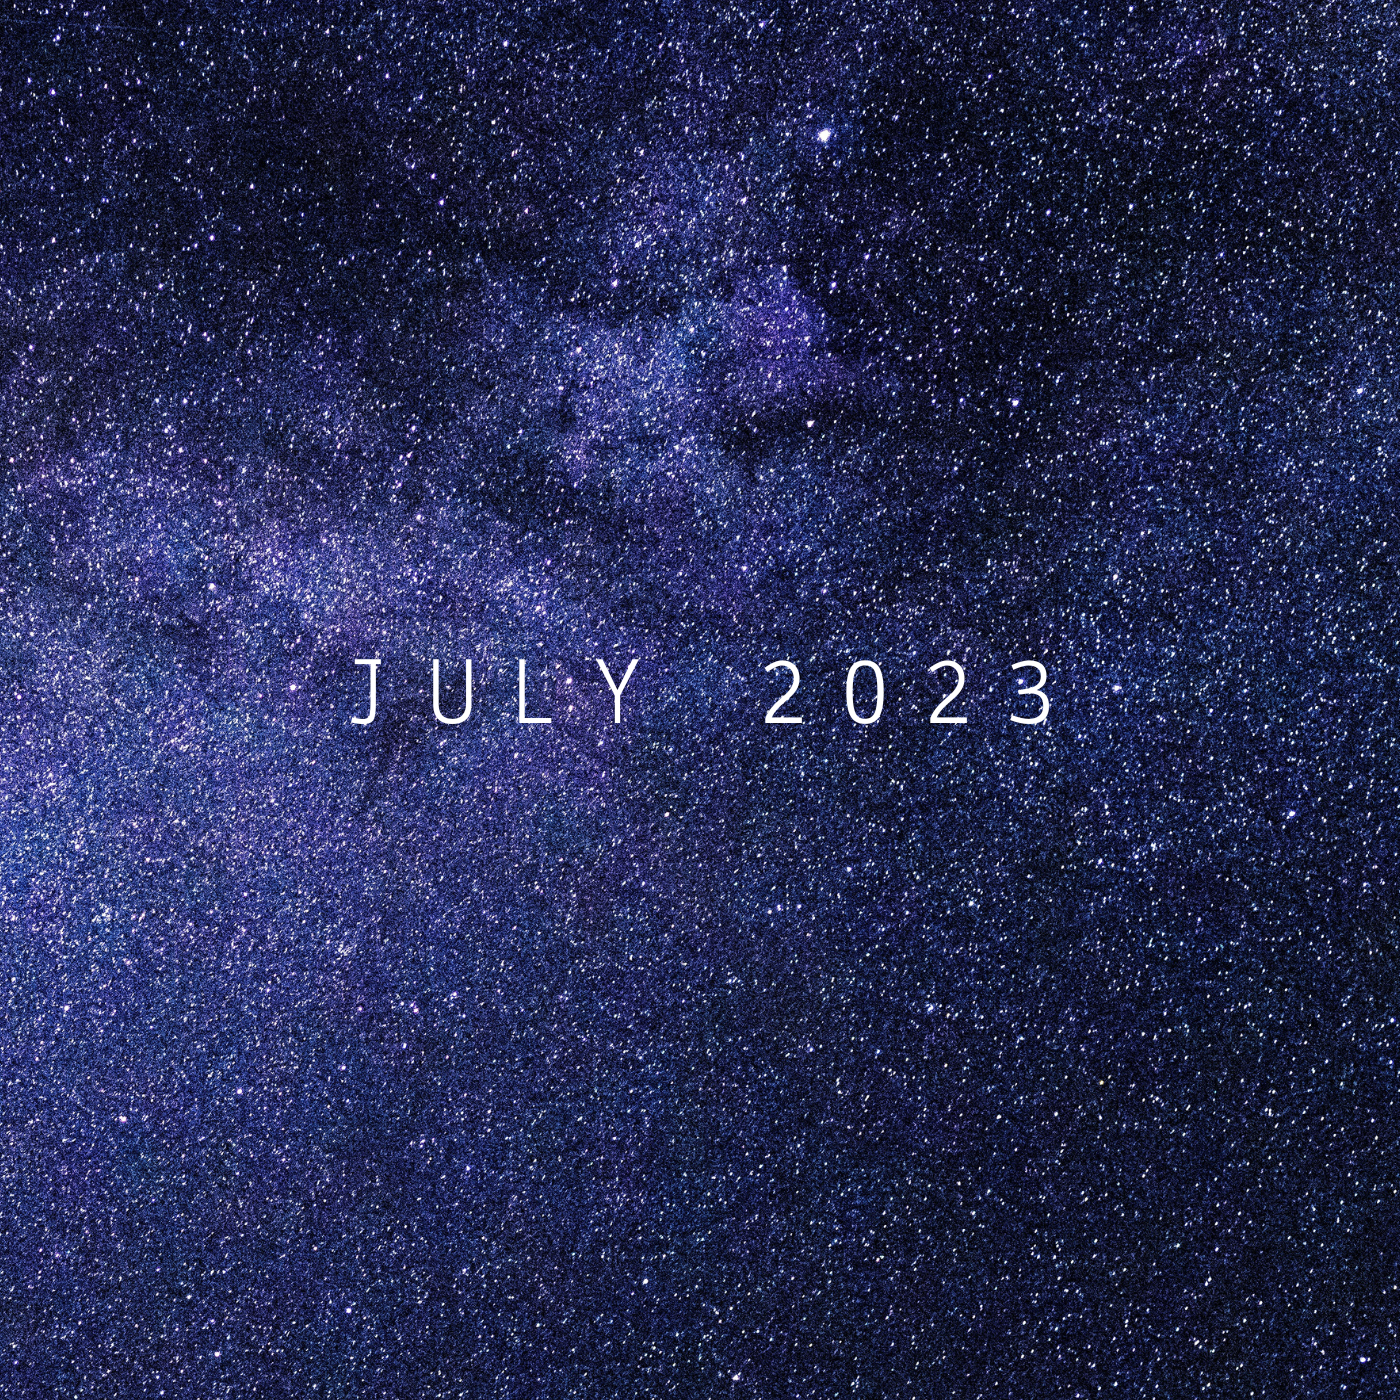 a square crop of dark blue and purple sky with a white speckled starfield with july 2023 in the center